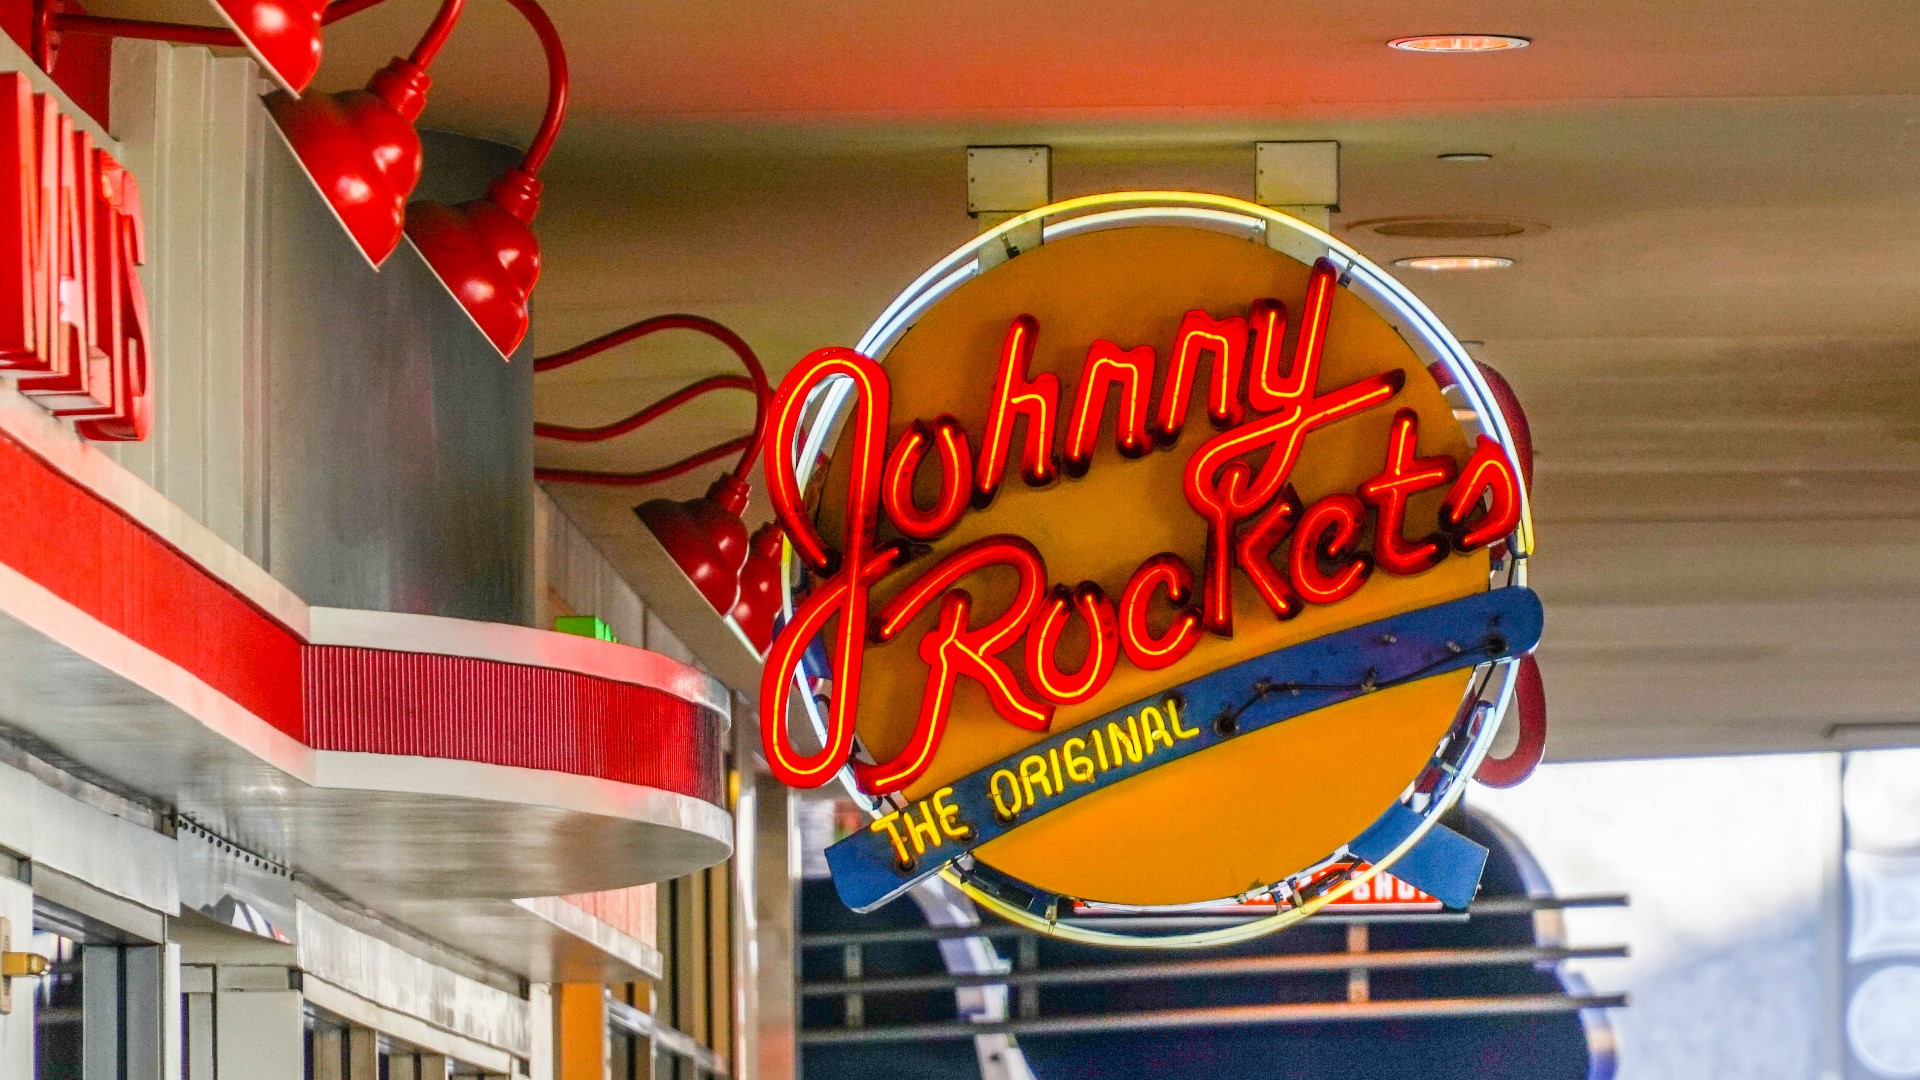 Johnny Rockets opens a new location in Northwest DC and Director of Franchise Operations Chris Heaton shows Ellen and Kristen how to assemble an original burger.